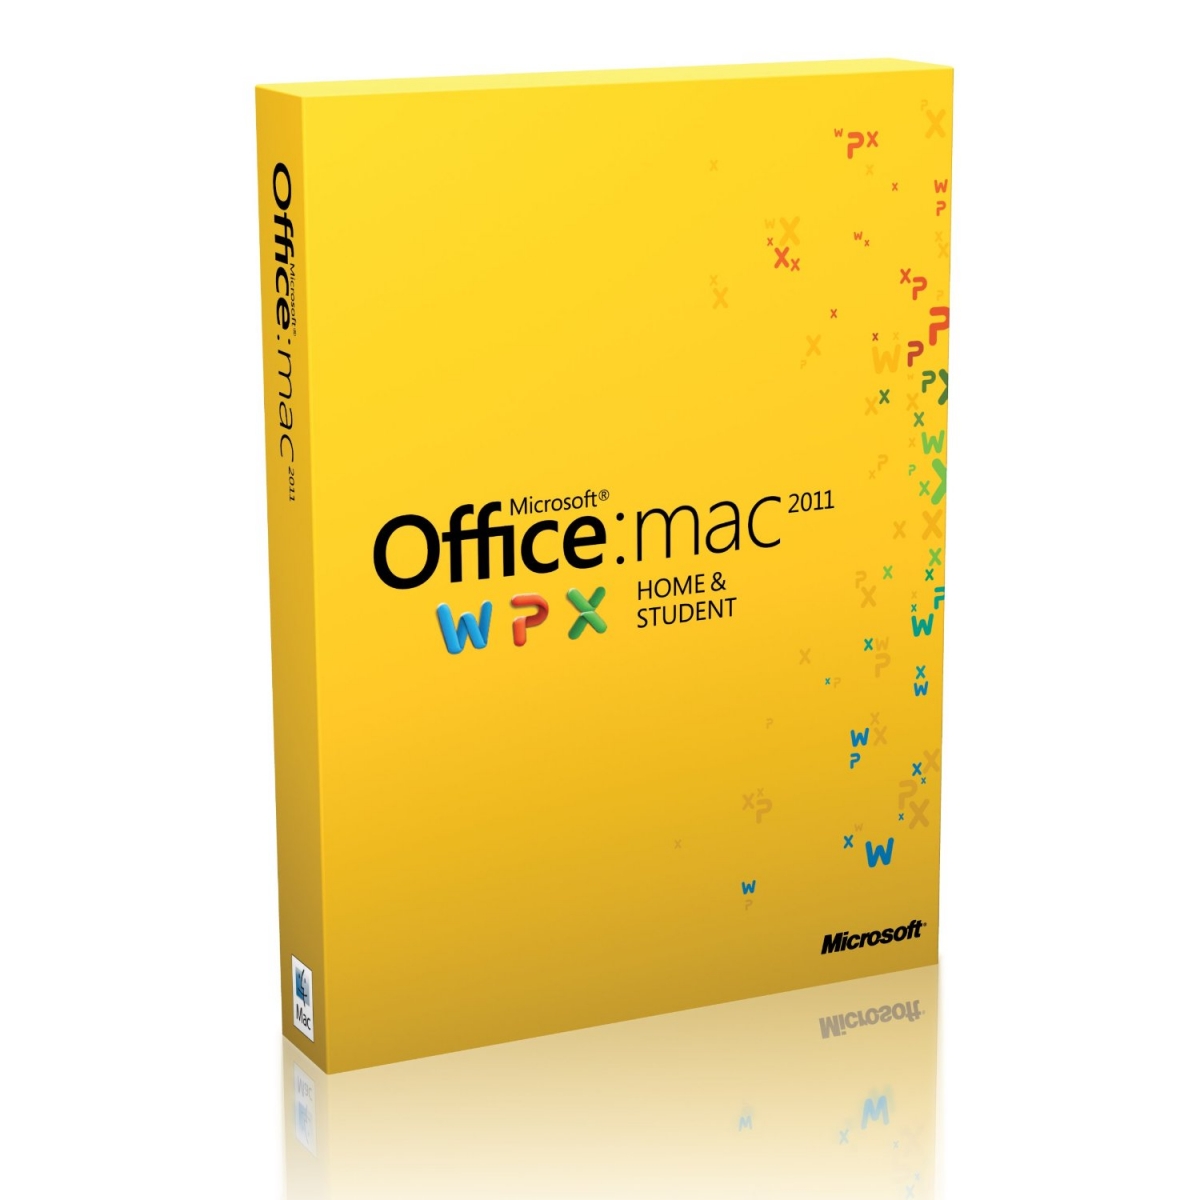 does office for mac 2011 work with el capitan